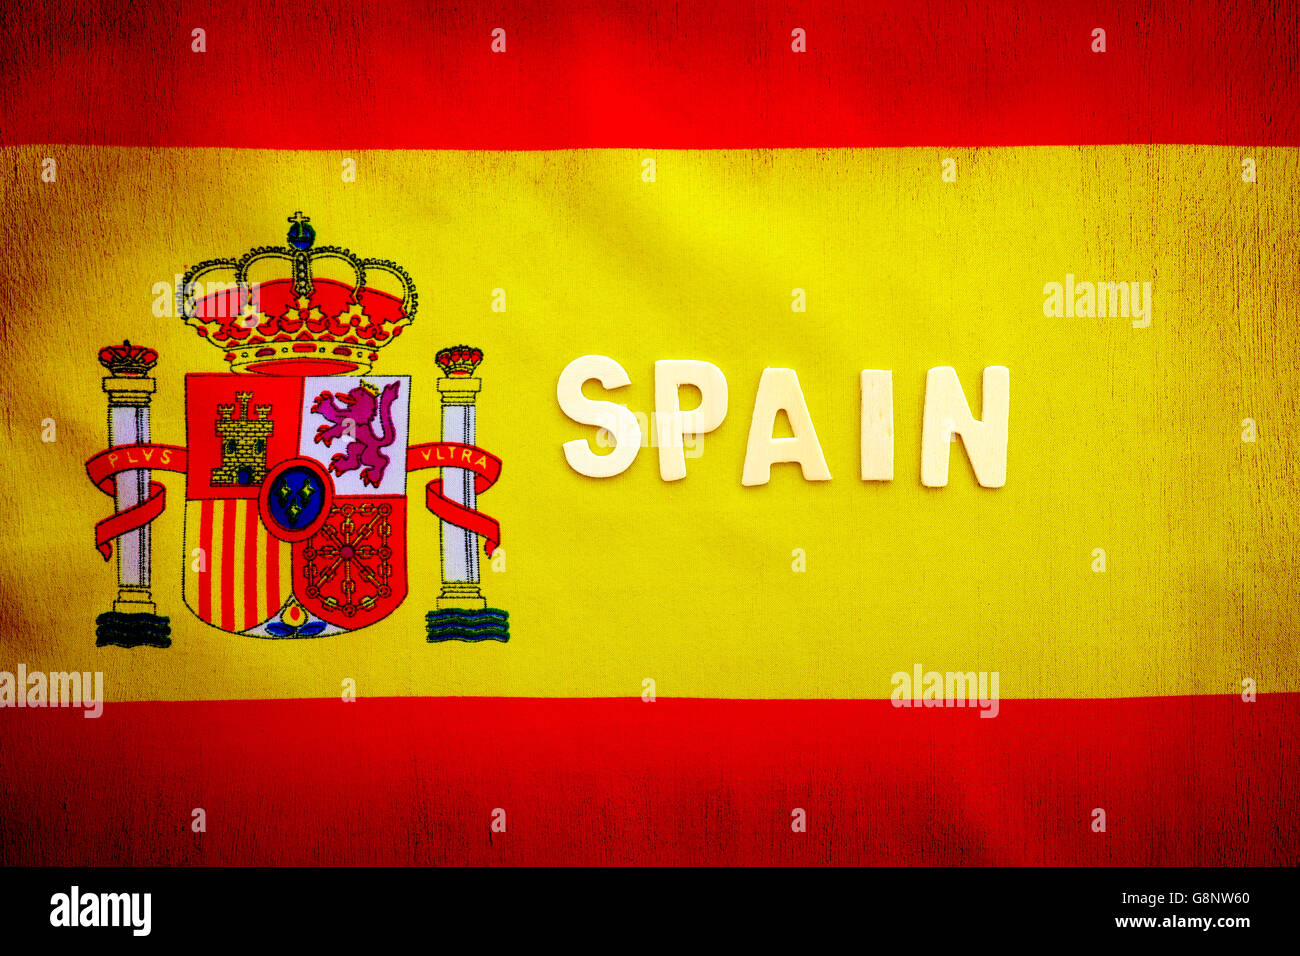 Spanish flag, yellow and red cloth with national Spain emblem, text space, grunge style patriotic wallpaper Stock Photo